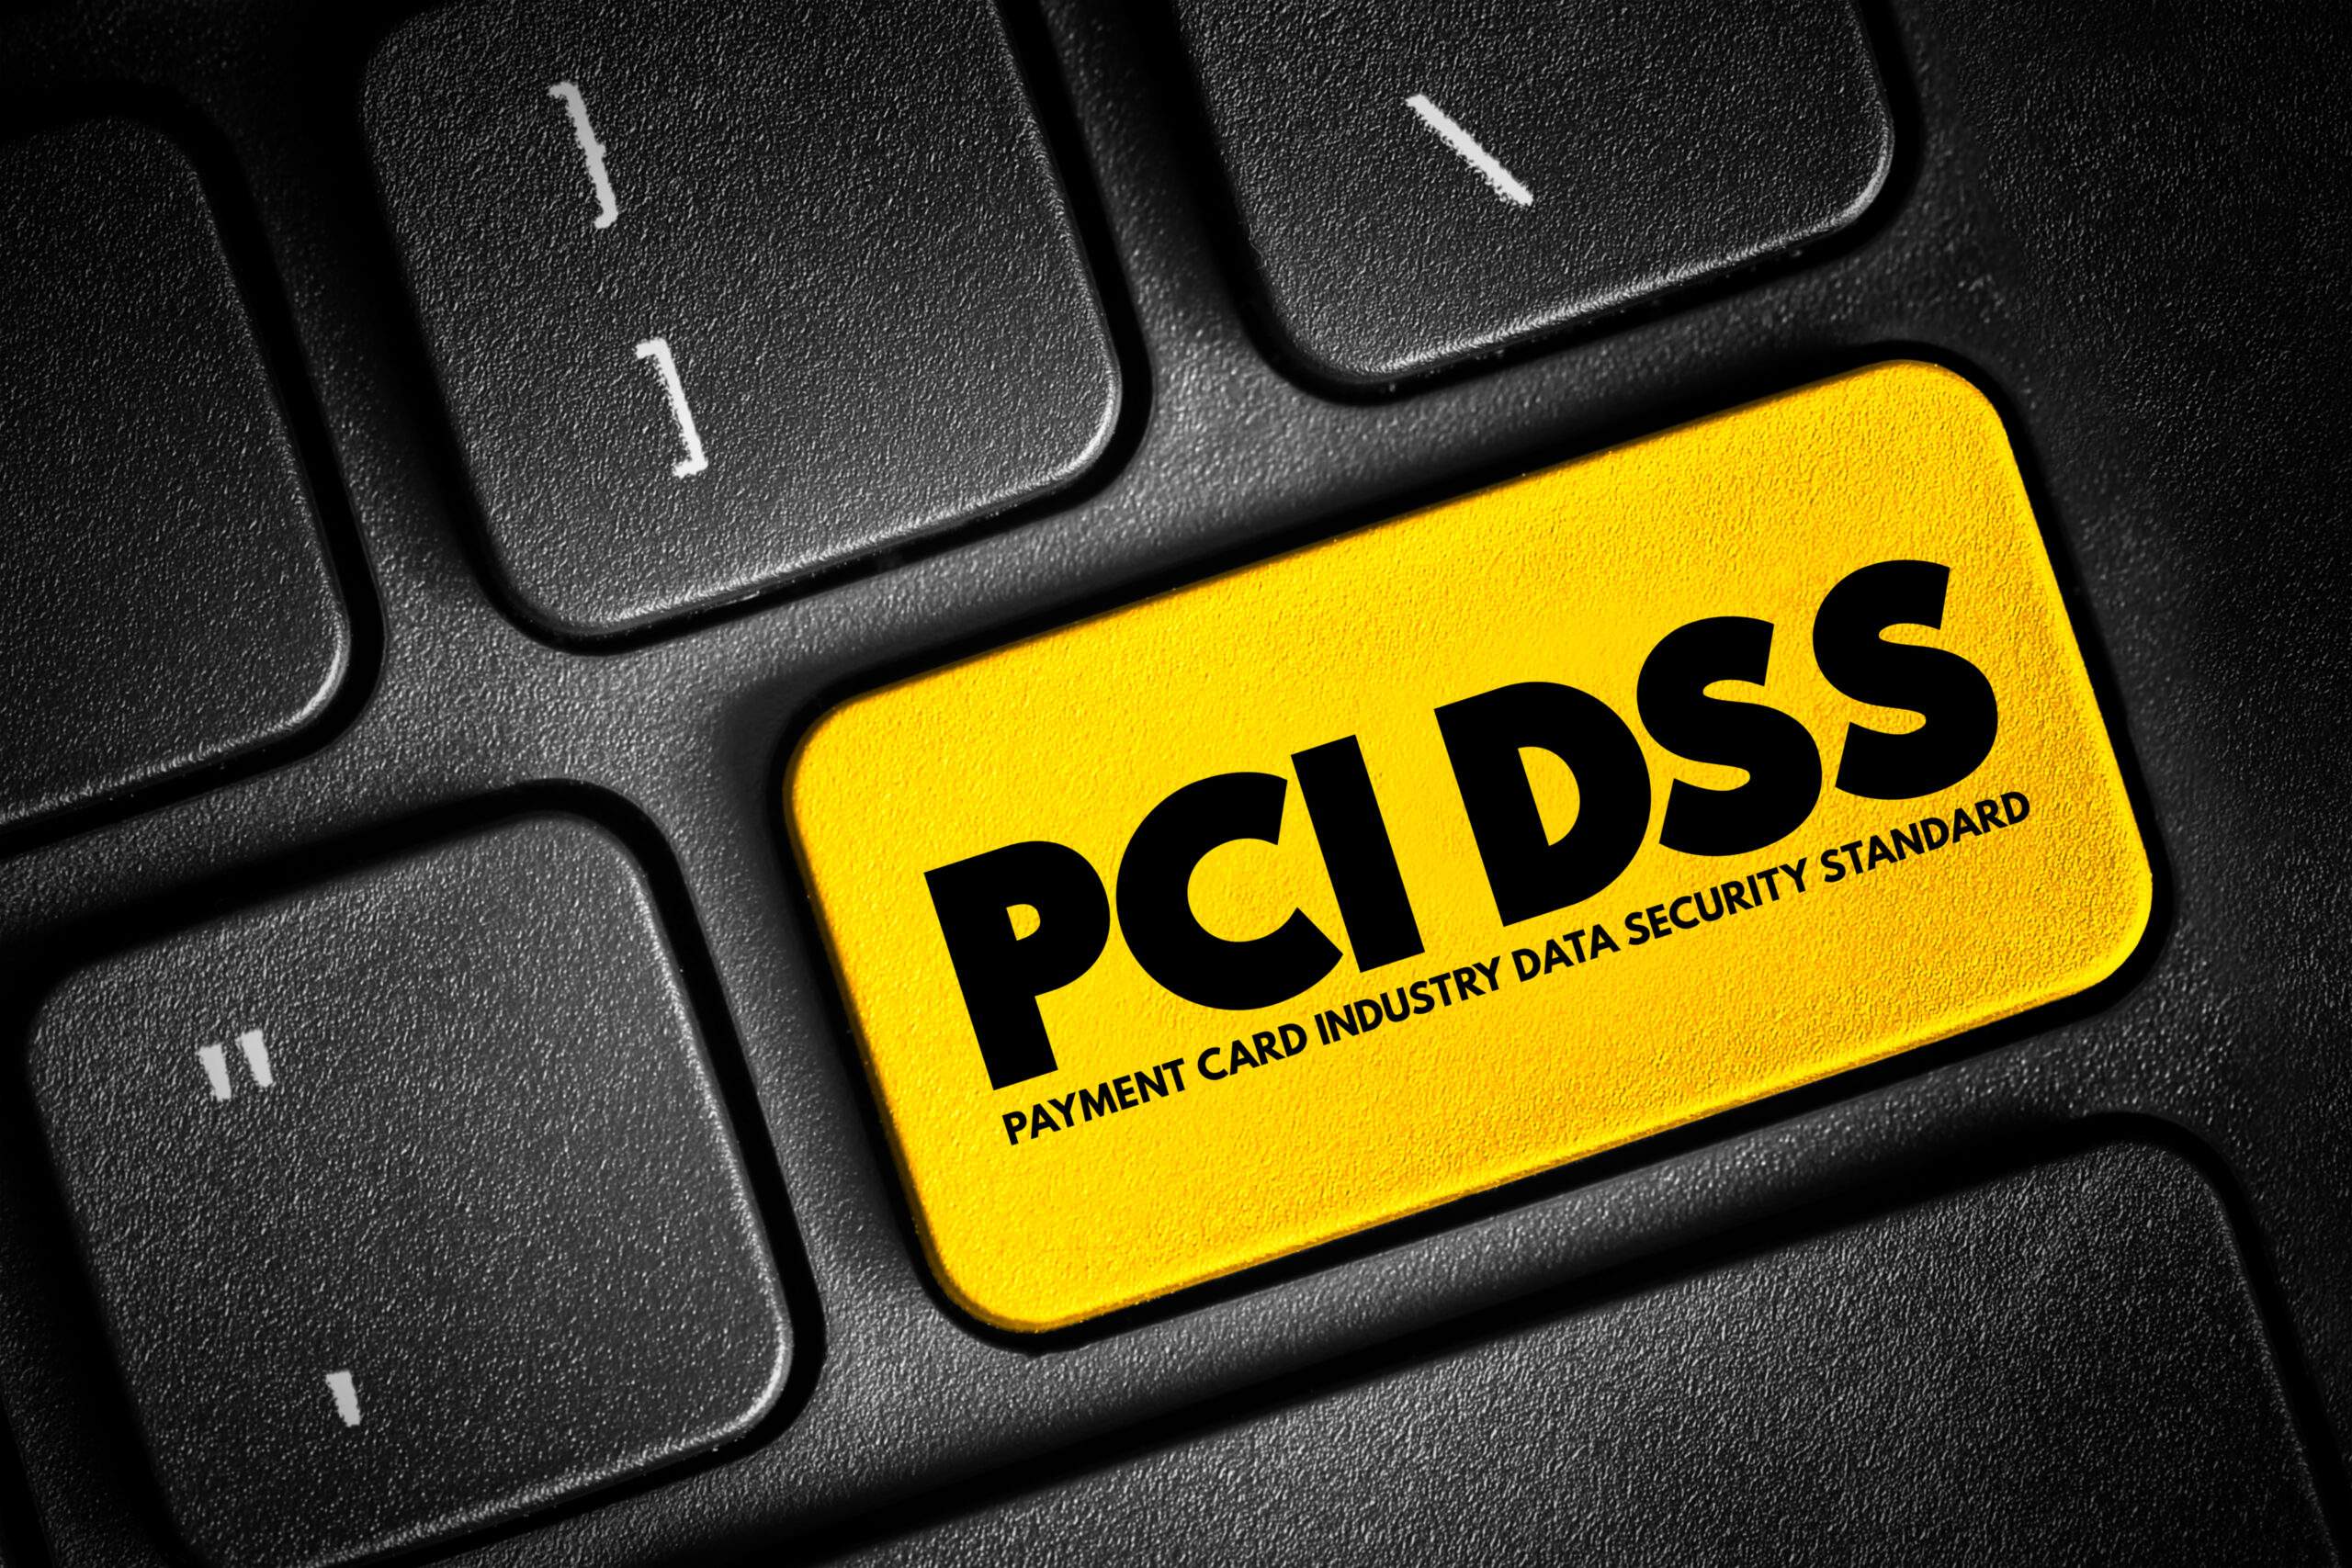 PCI-DSS Rules represented by a custom keyboard button